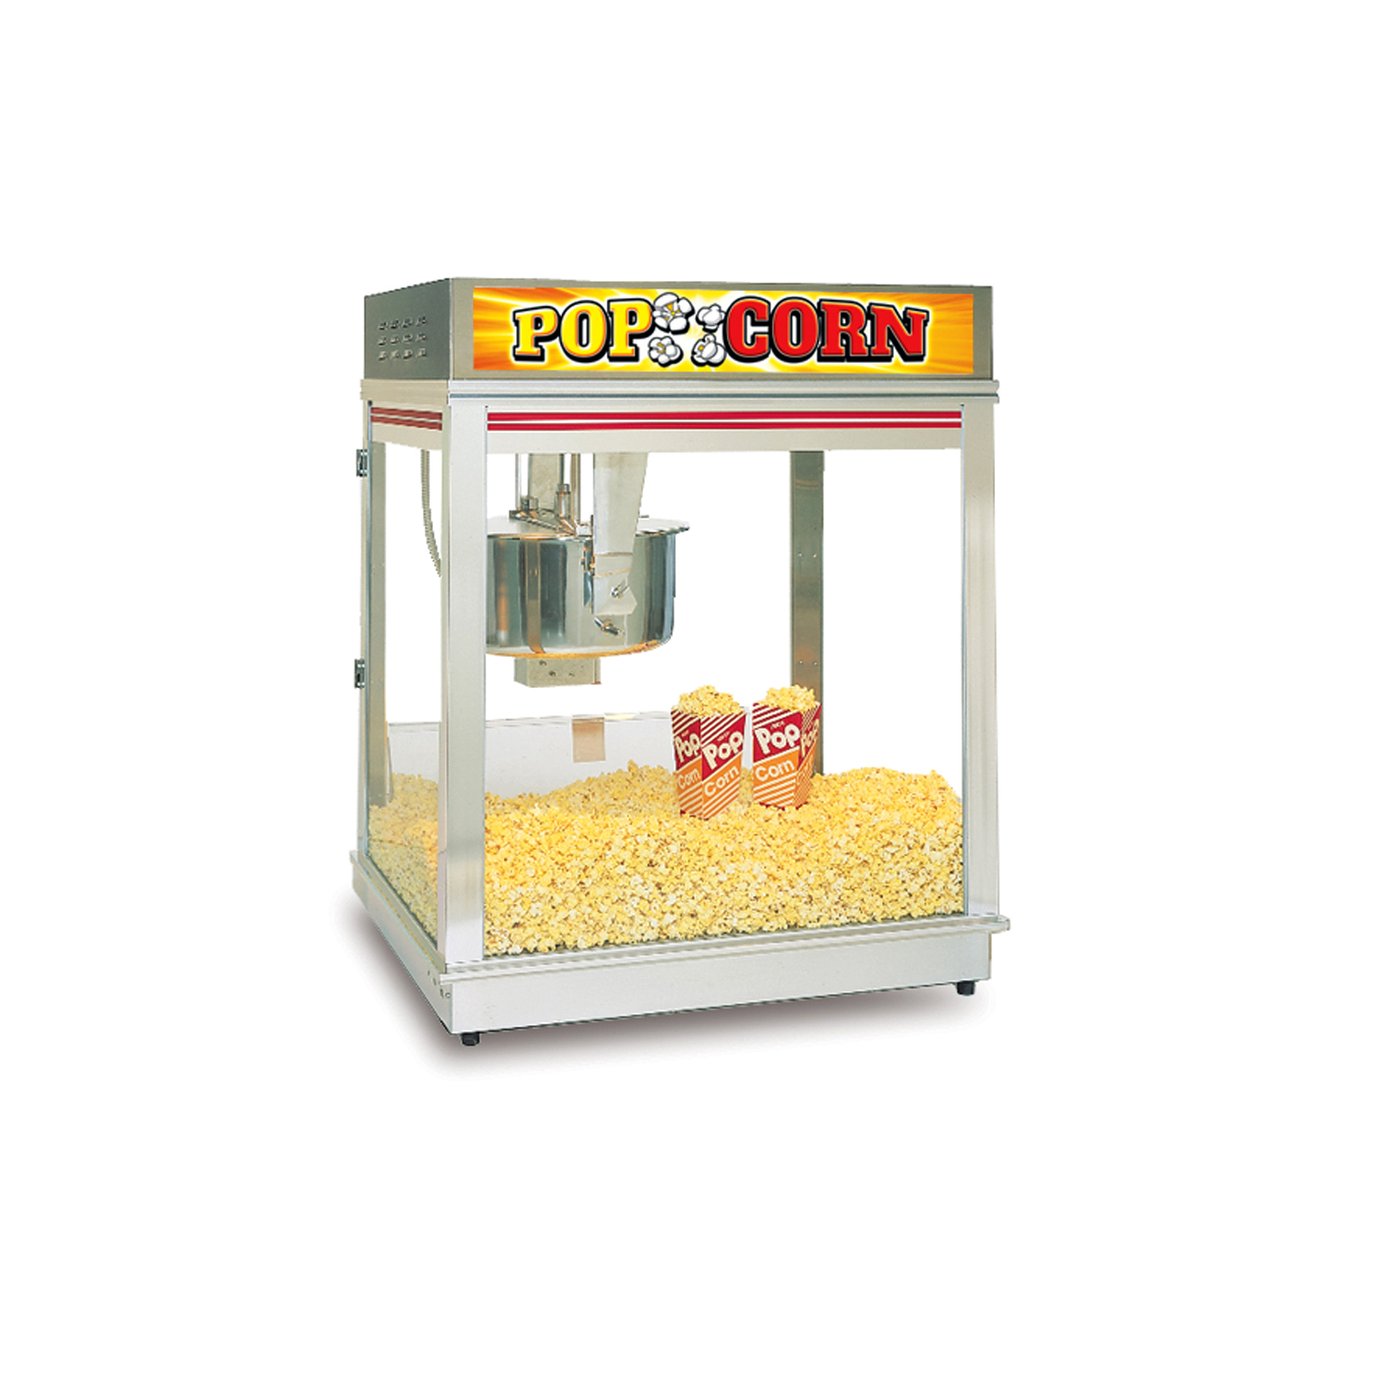 ReadyPop Self Serve -Front Counter Model Popcorn Machine ideal for